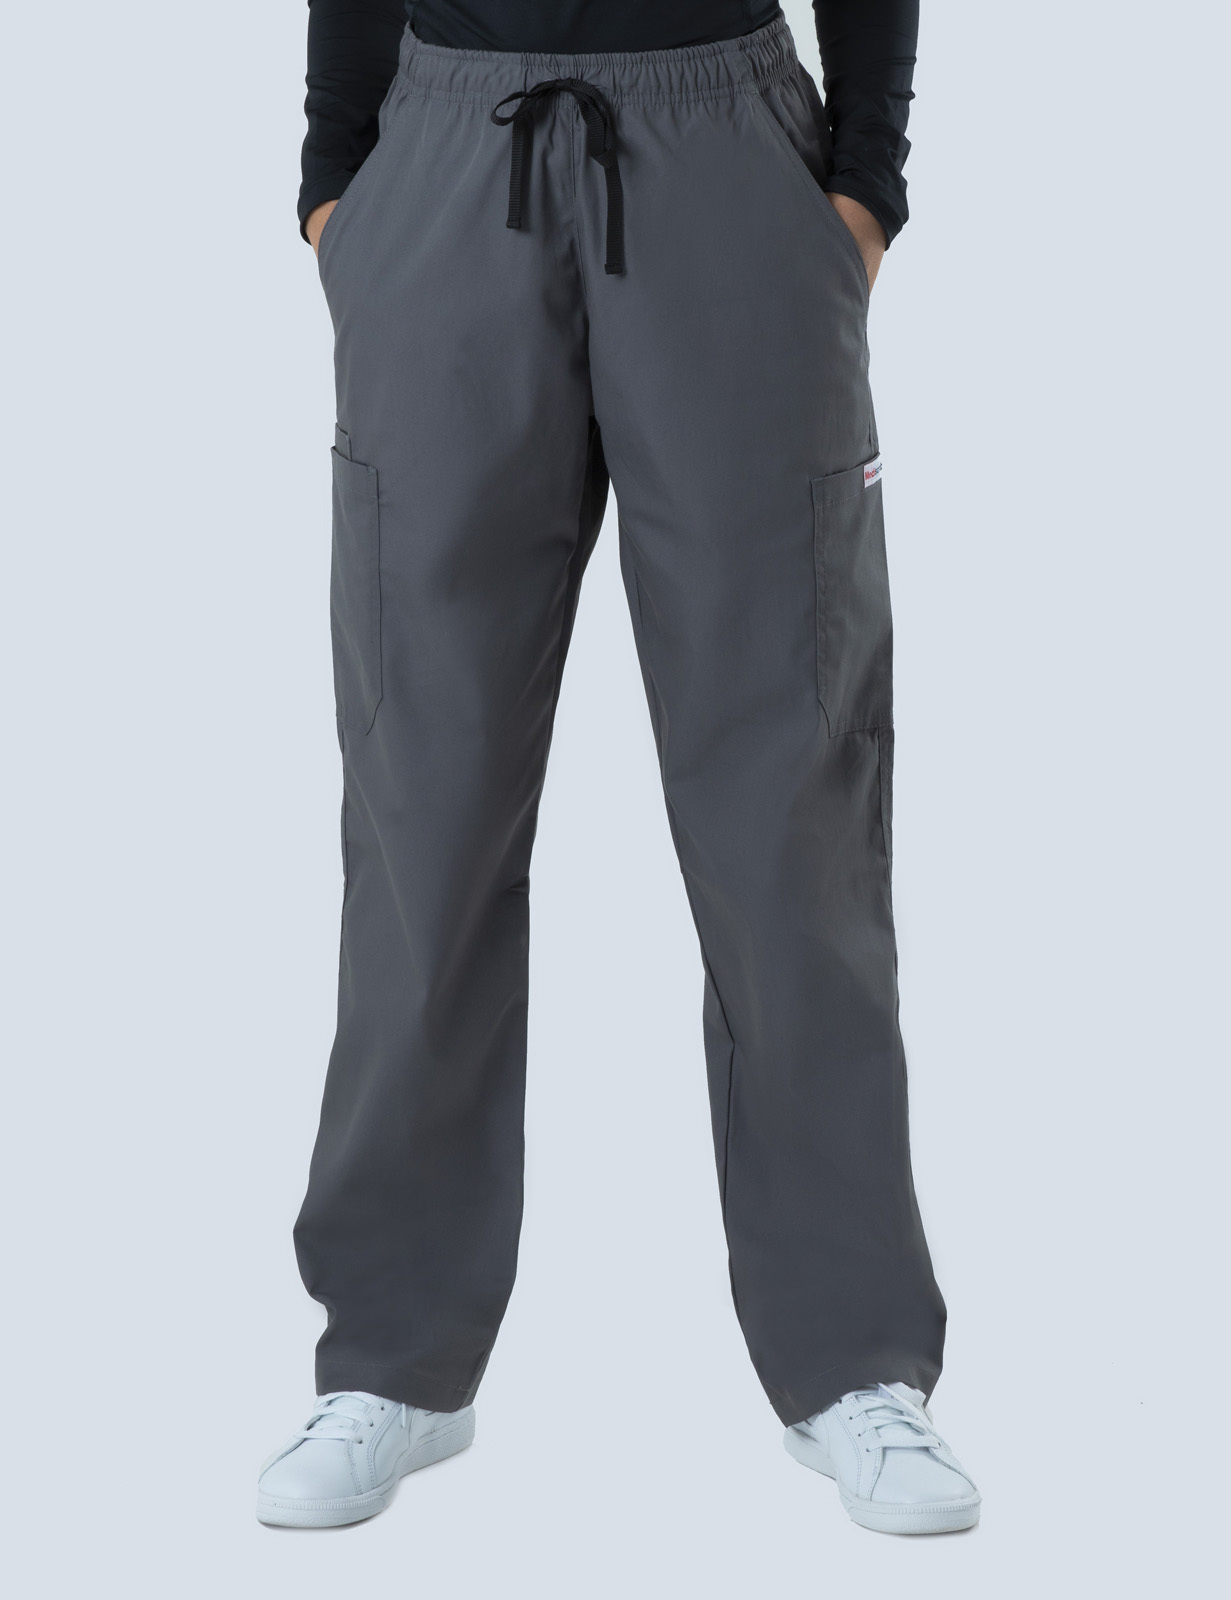 Maleny Hospital - RN Emergency (Women's Fit Solid Scrub Top and Cargo Pants in Steel Grey incl Logos)